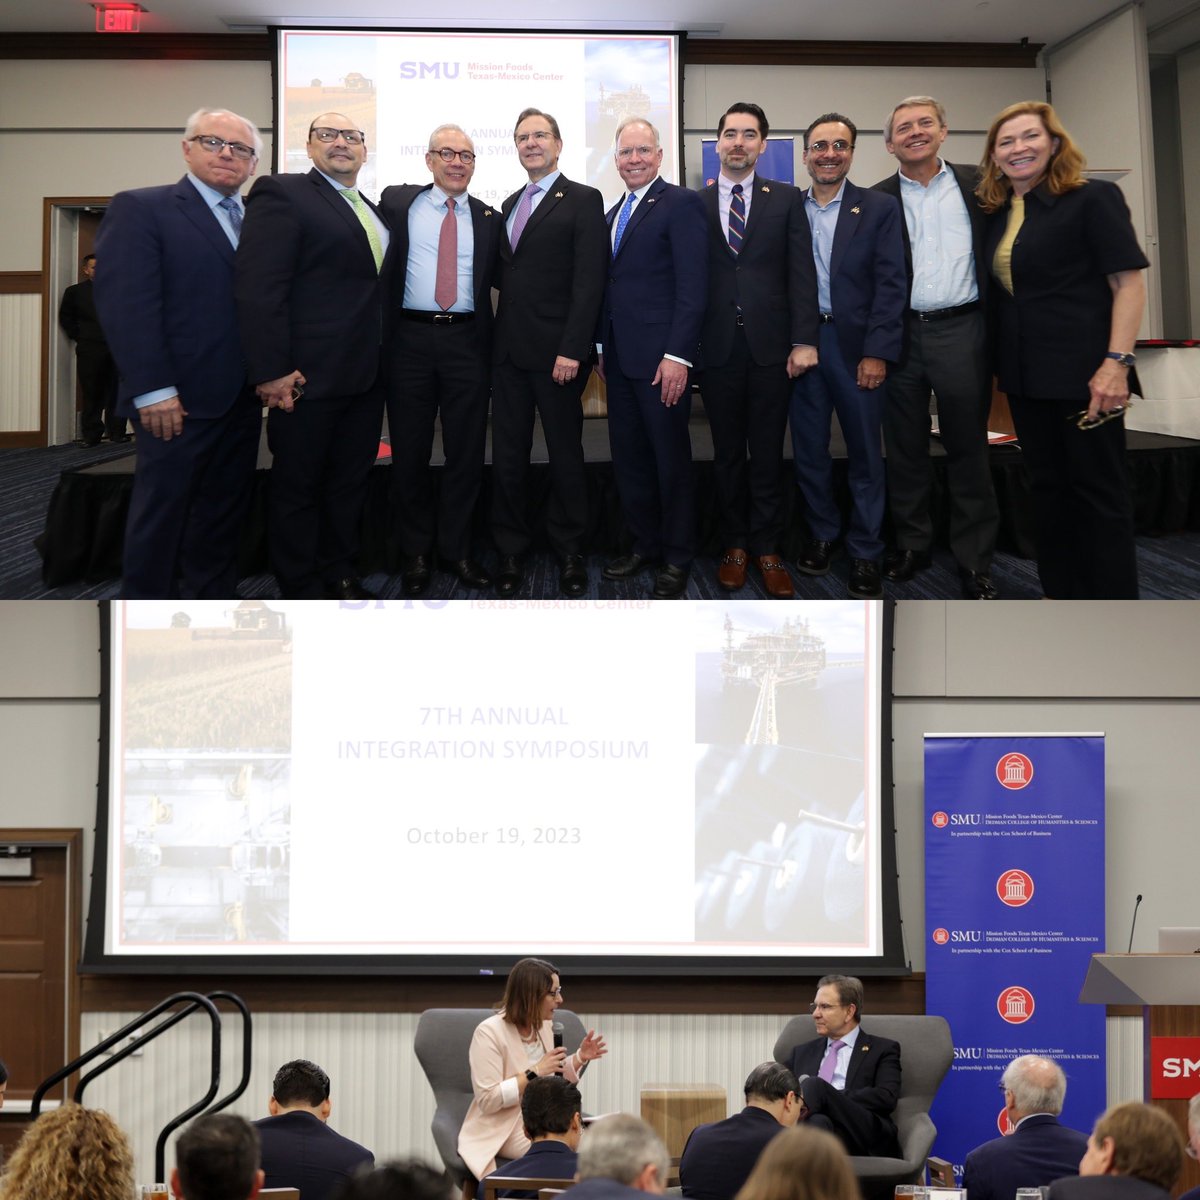 We were delighted to host Ambassador of Mexico @emoctezumab at our 7th Annual Integration Symposium. His conversation with our Senior Fellow @piaorrenius was full of insights about how to further advance cooperation with #Mexico . Thanks to everyone who joined us @SMU